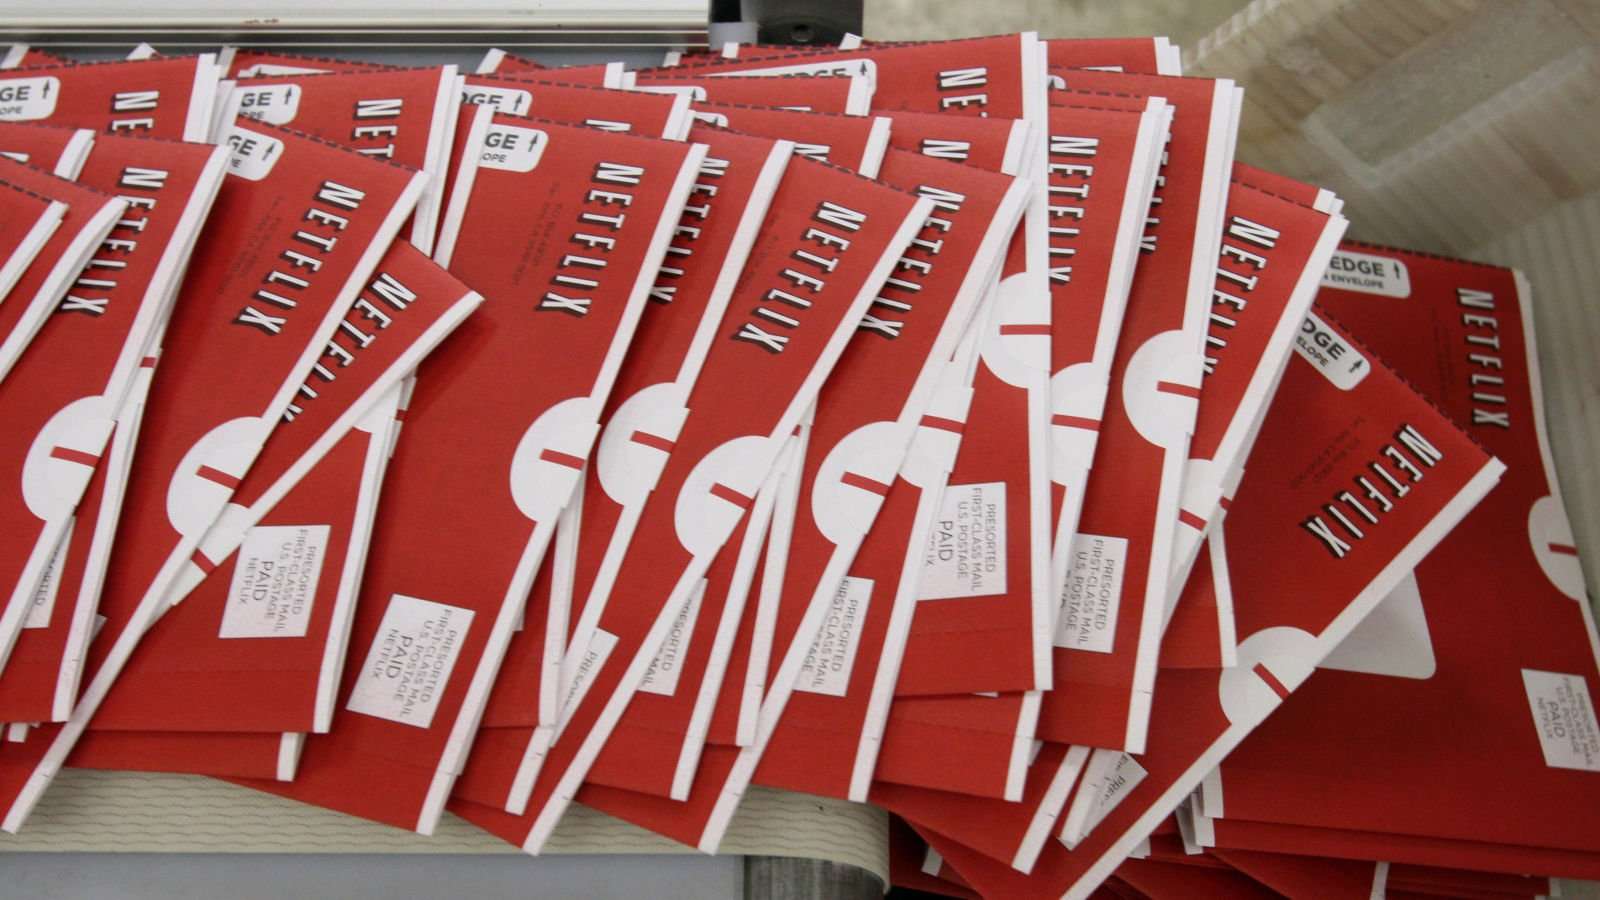 image for Whoa, there are still 3 million people using Netflix for DVDs